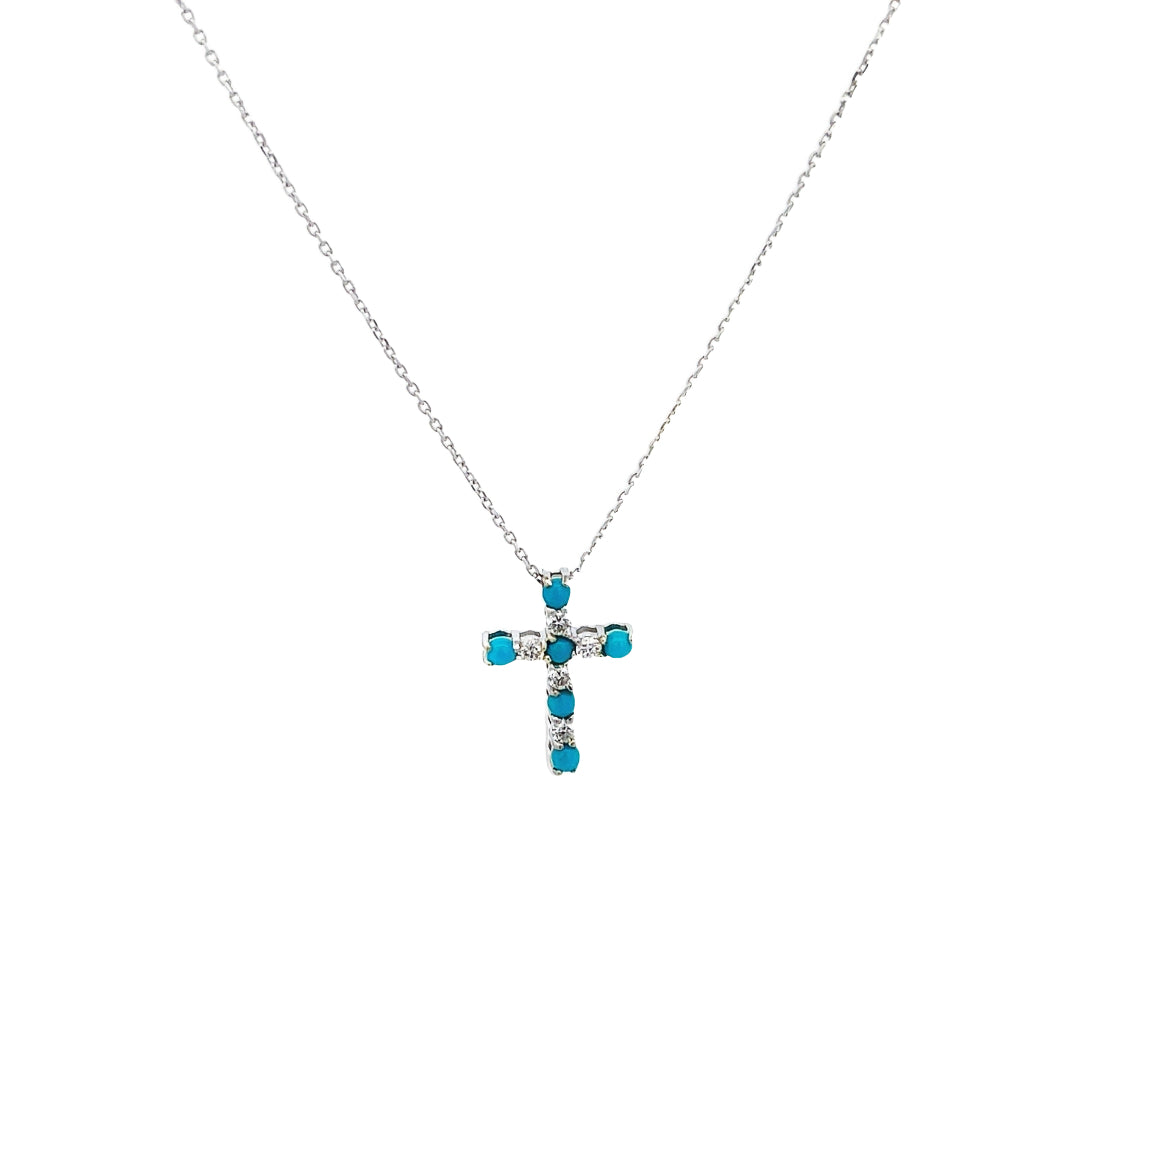 18K WHITE GOLD DIAMOND CROSS NECKLACE WITH TURQUOISE